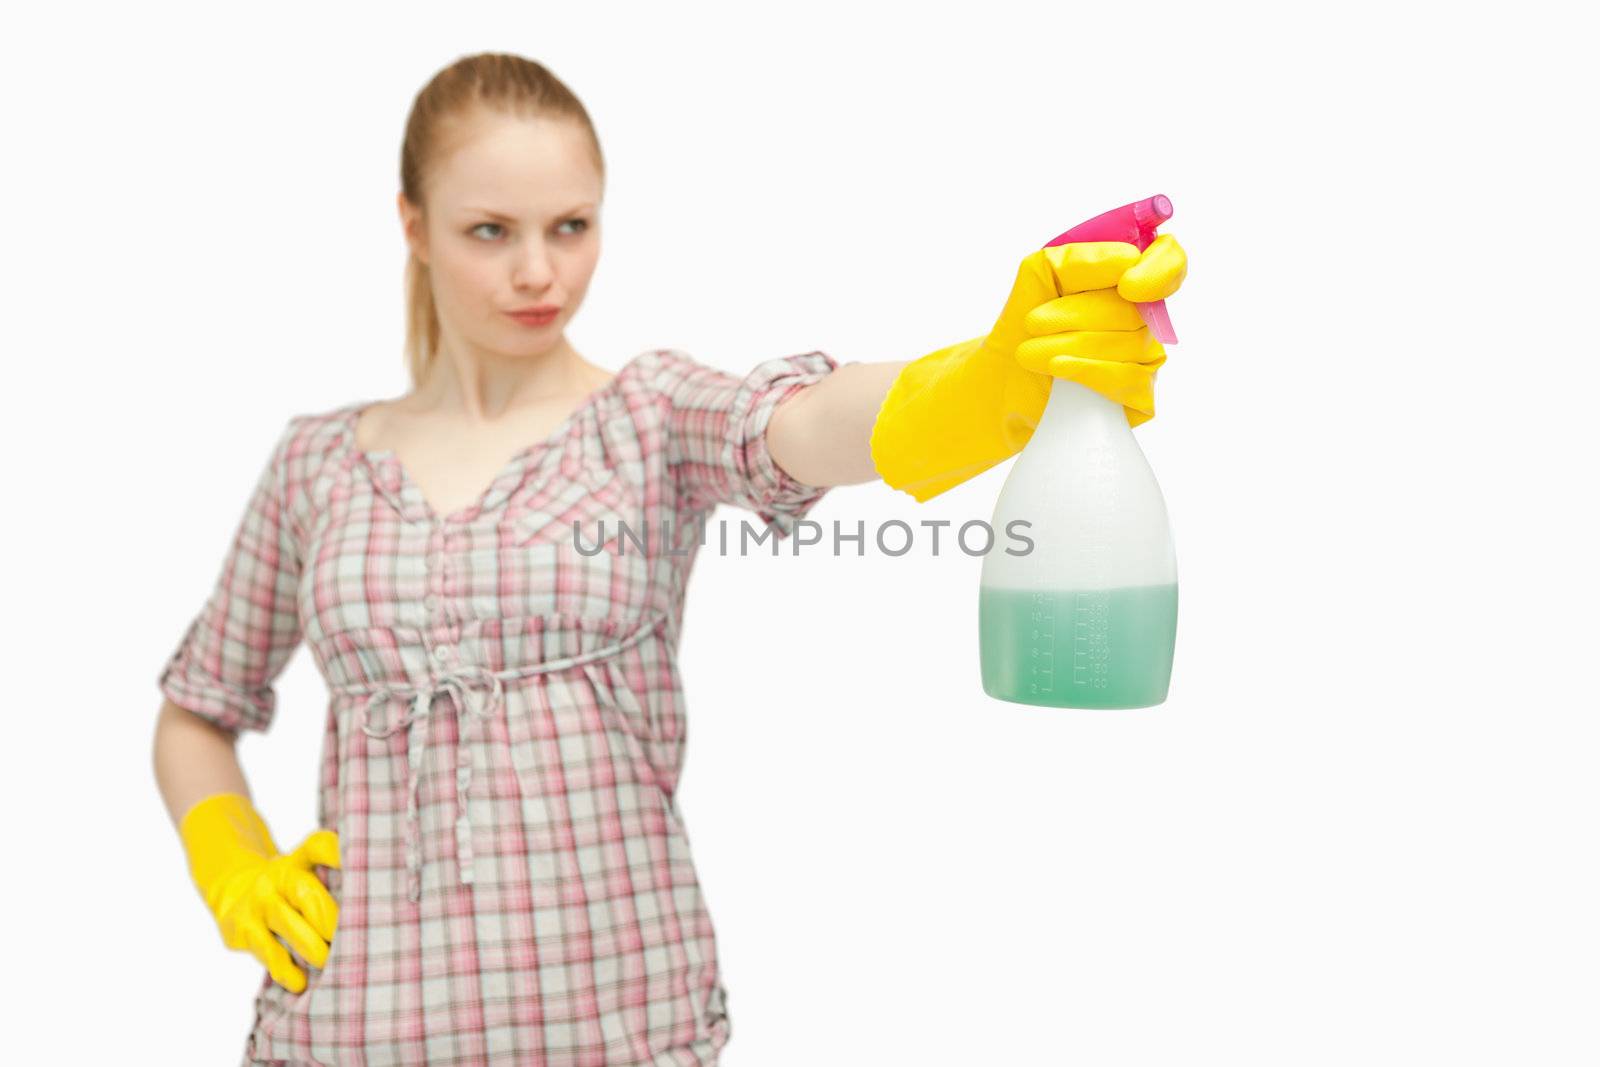 Serious woman holding a spray bottle while looking away against white background